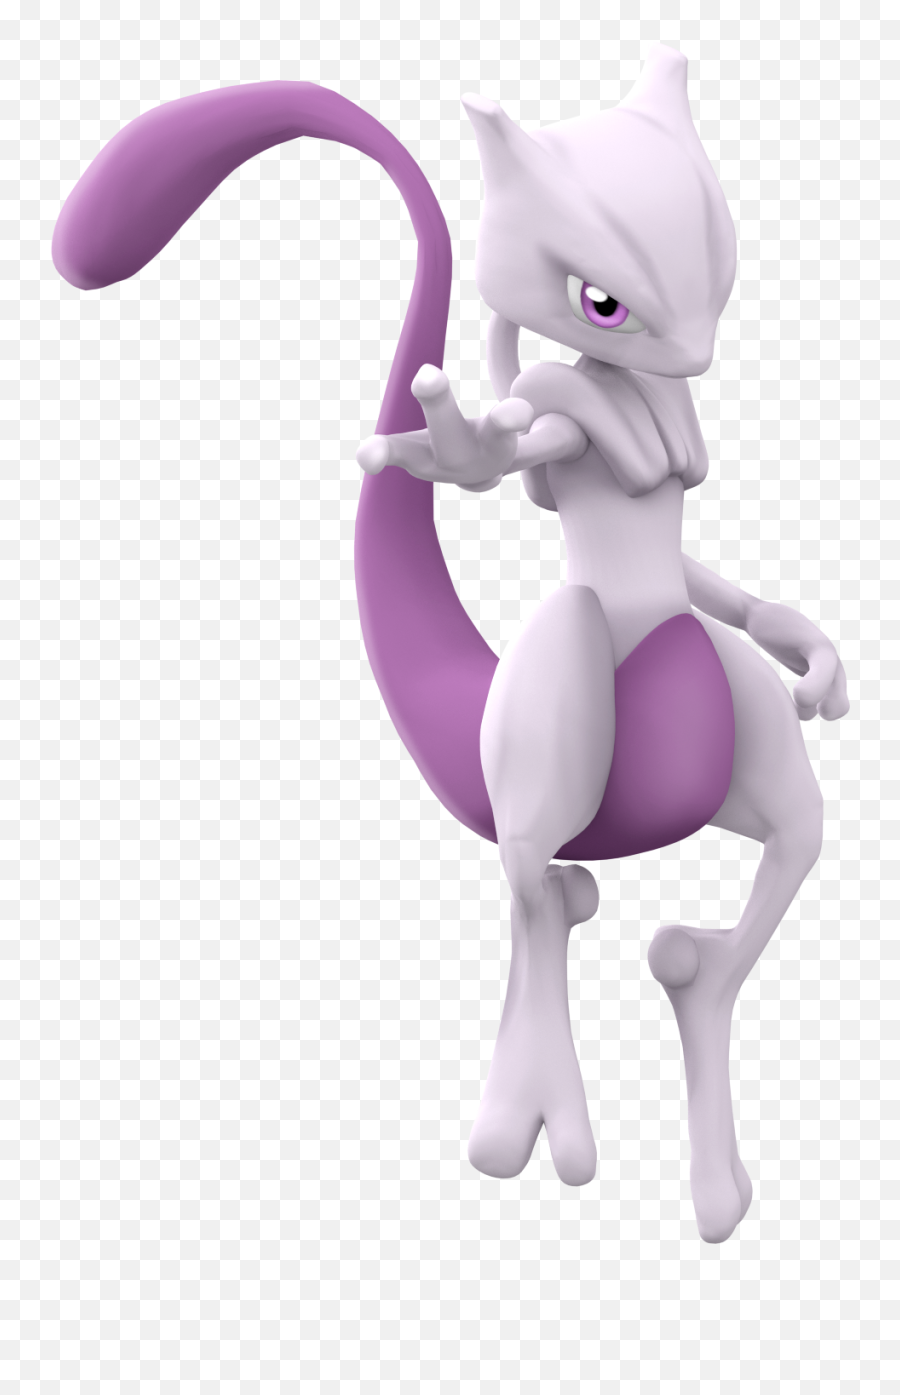 Mewtwo Pokemon Go Png For Free Download Transparent Mewtwo Png Mewtwo Png Free Transparent Png Images Pngaaa Com